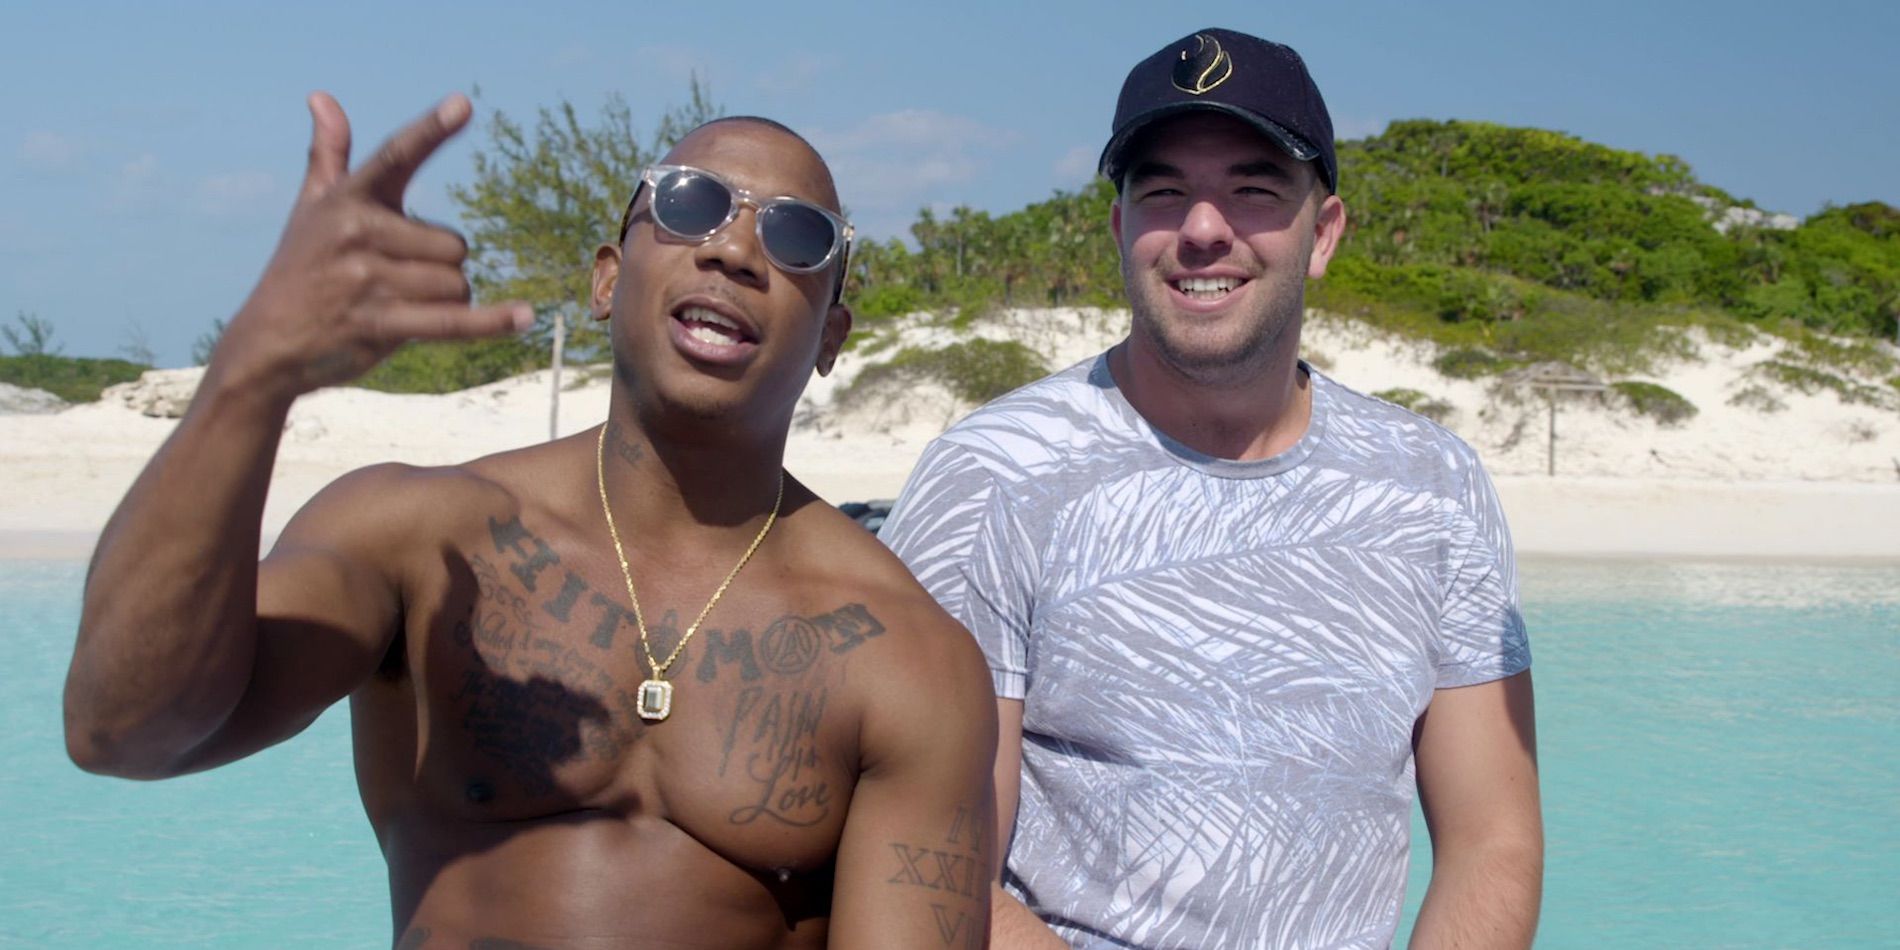 The Faces Of The Fyre Festival Where Are They Now